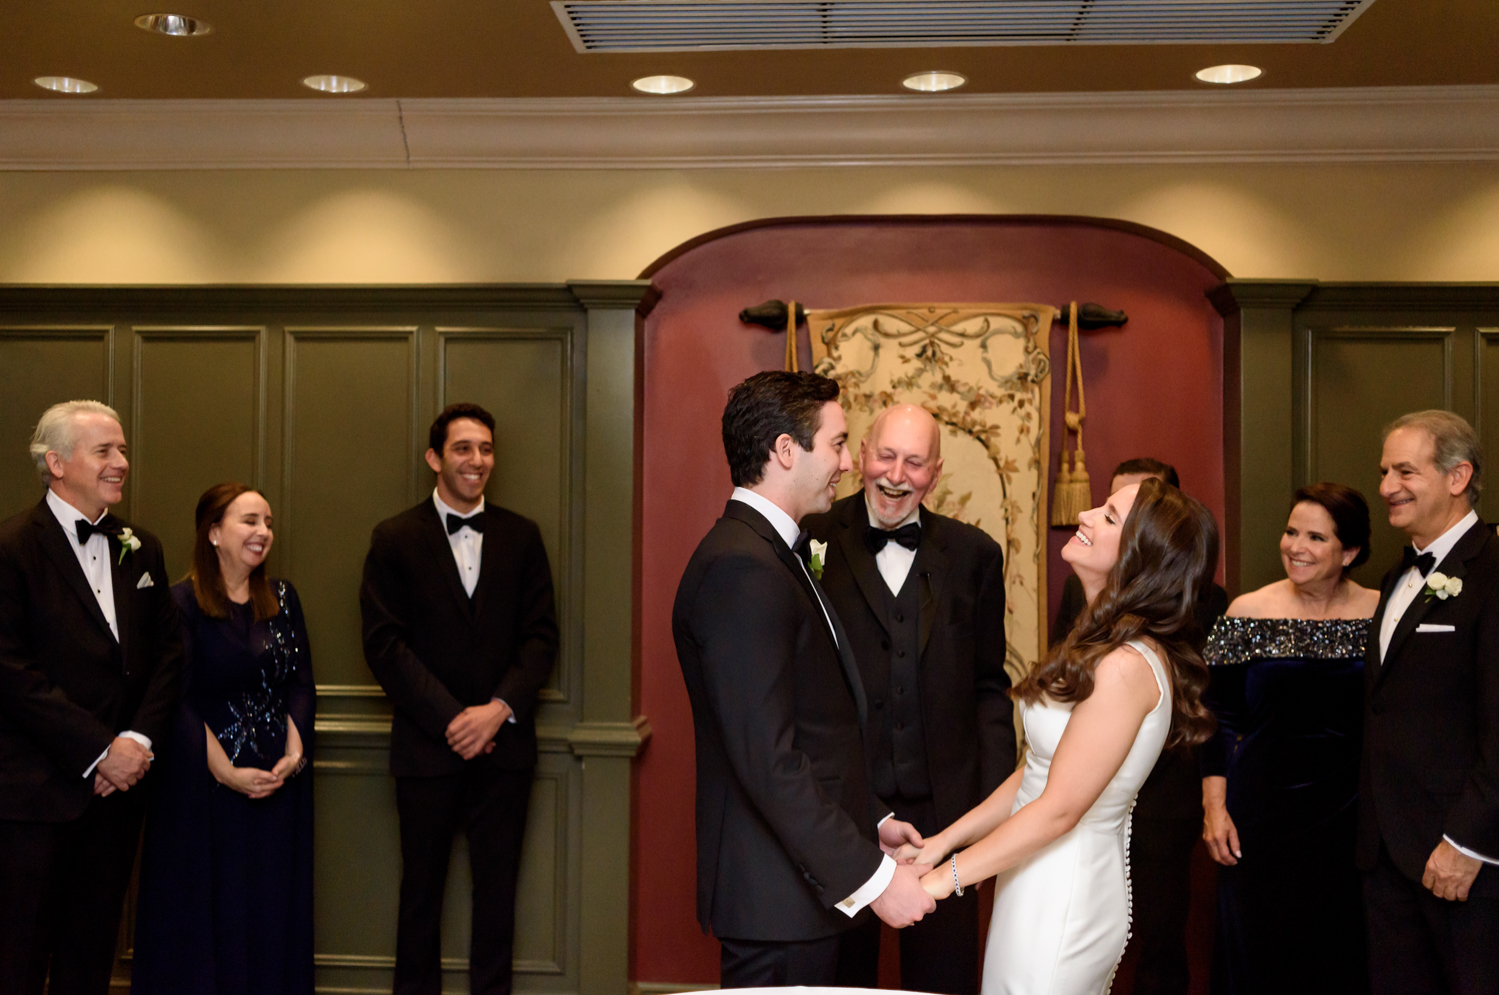 The bride and groom hold hands and laugh with their families during the ketubah ceremony.